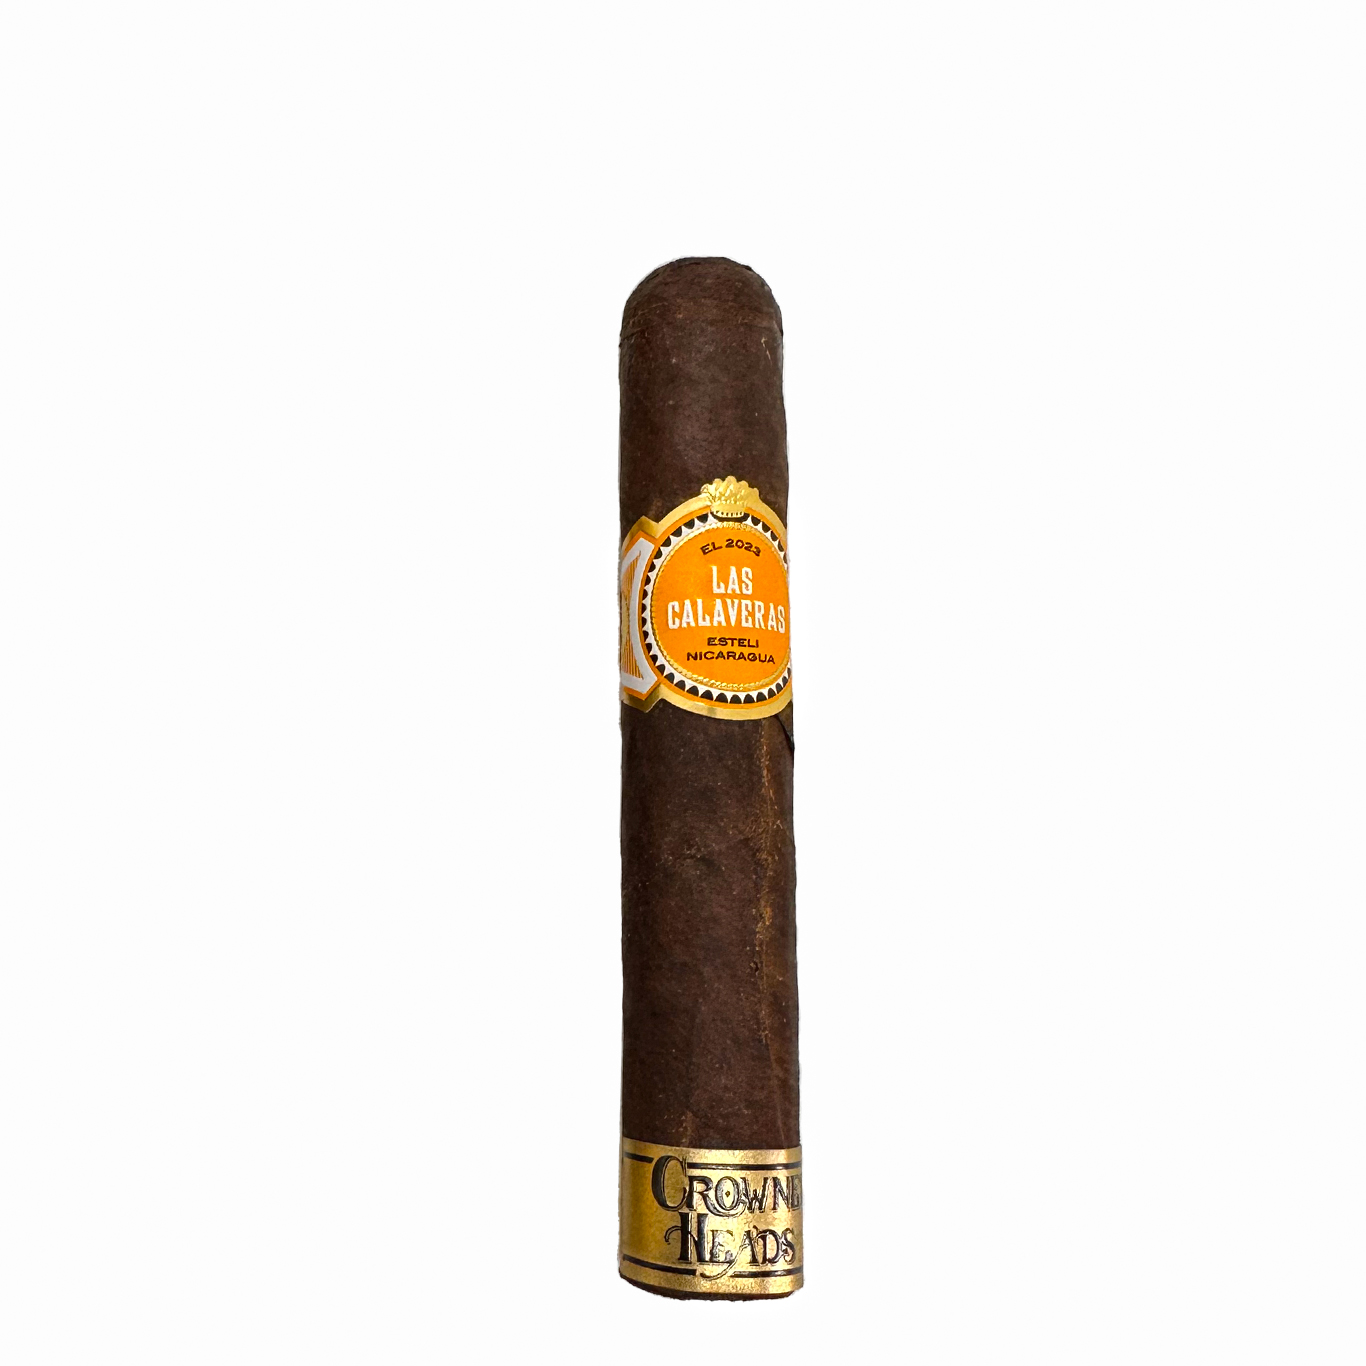 A picture of a cigar with a rating